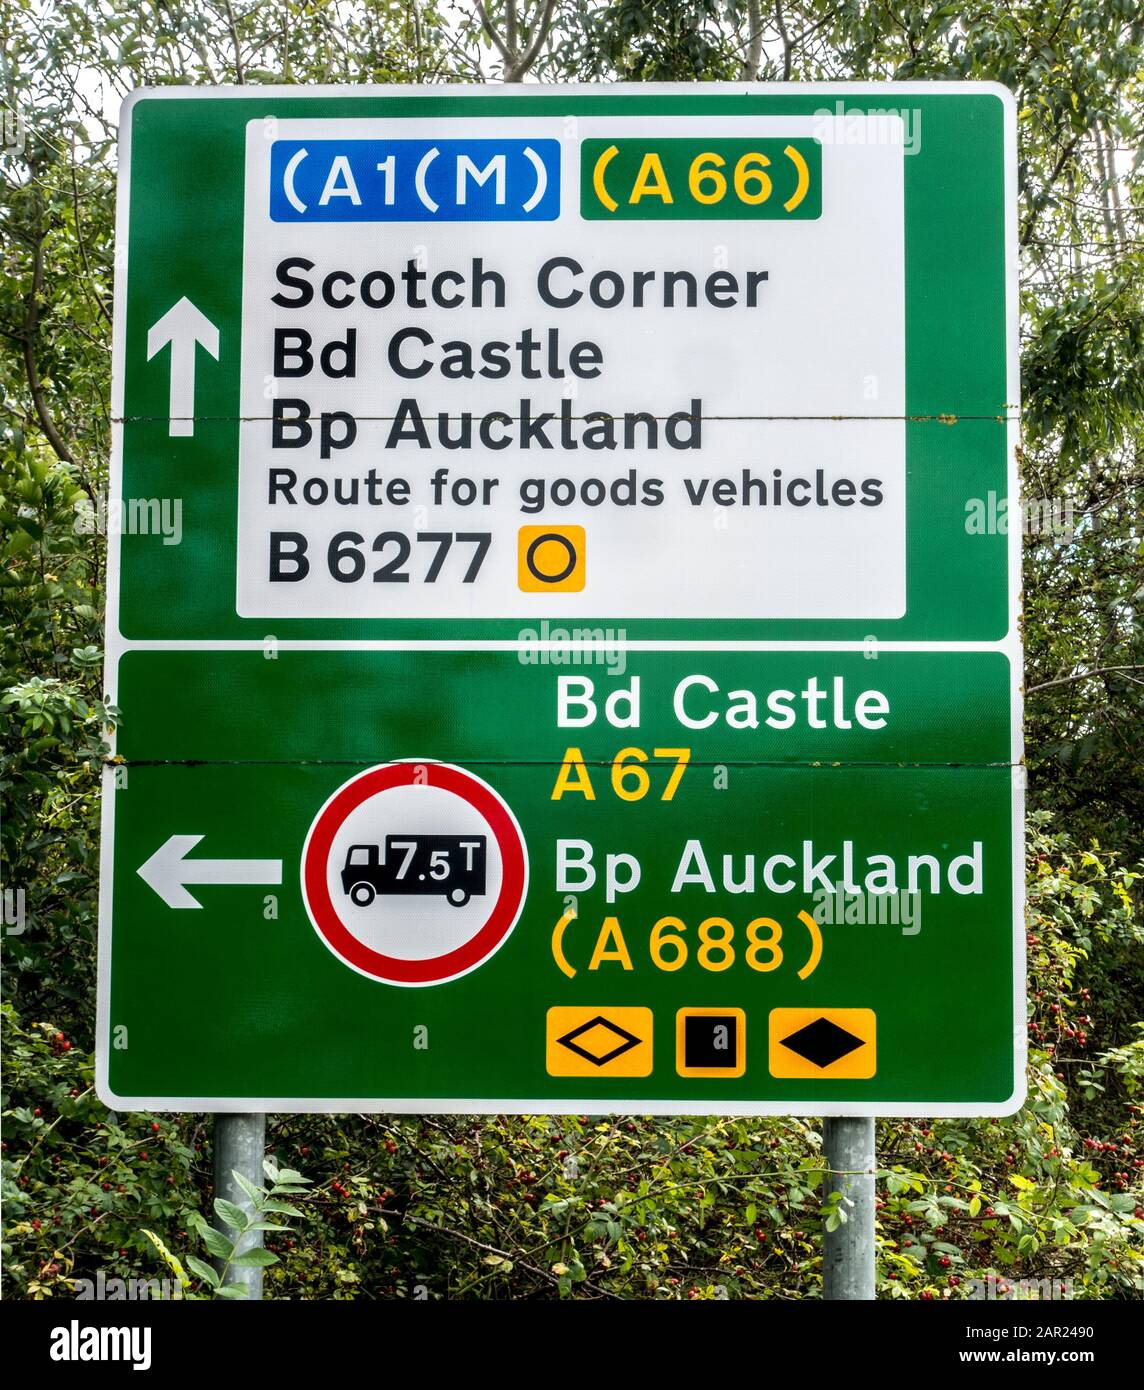 Large road sign in Teesdale, County Durham, England for A1(M), A66, B6277, Scotch Corner, Barnard Castle, Bishop Auckland, route for goods vehicles. Stock Photo